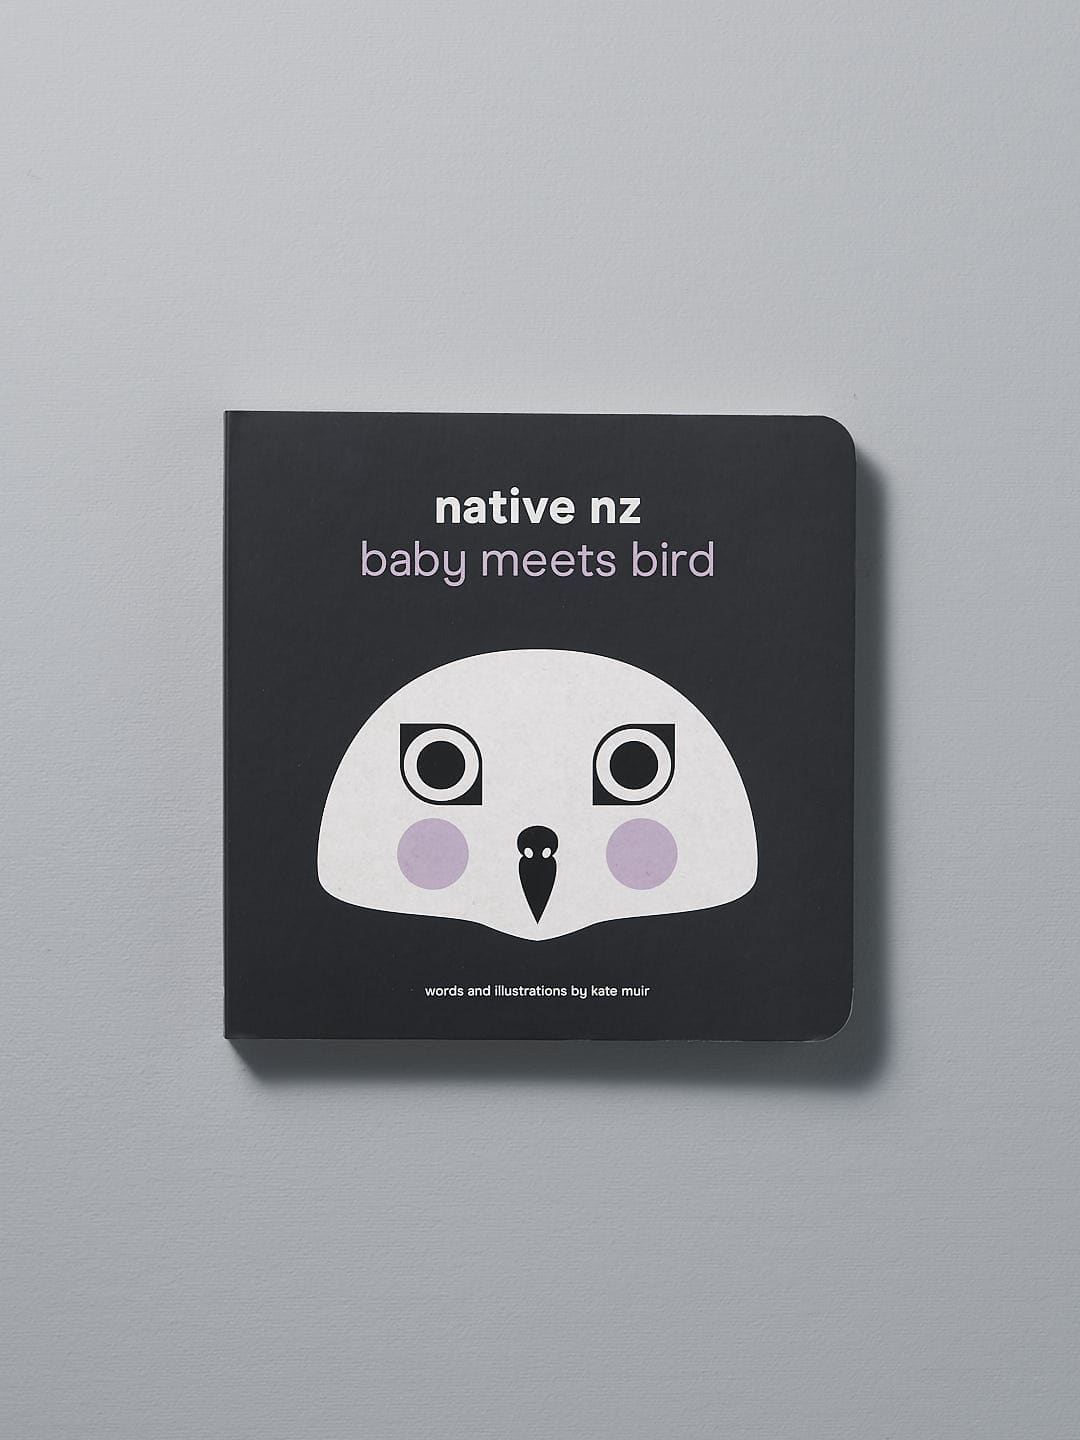 A board book titled &quot;Native NZ Baby Meets Bird&quot; with a simple New Zealand birds illustration on the cover by Kate Muir.